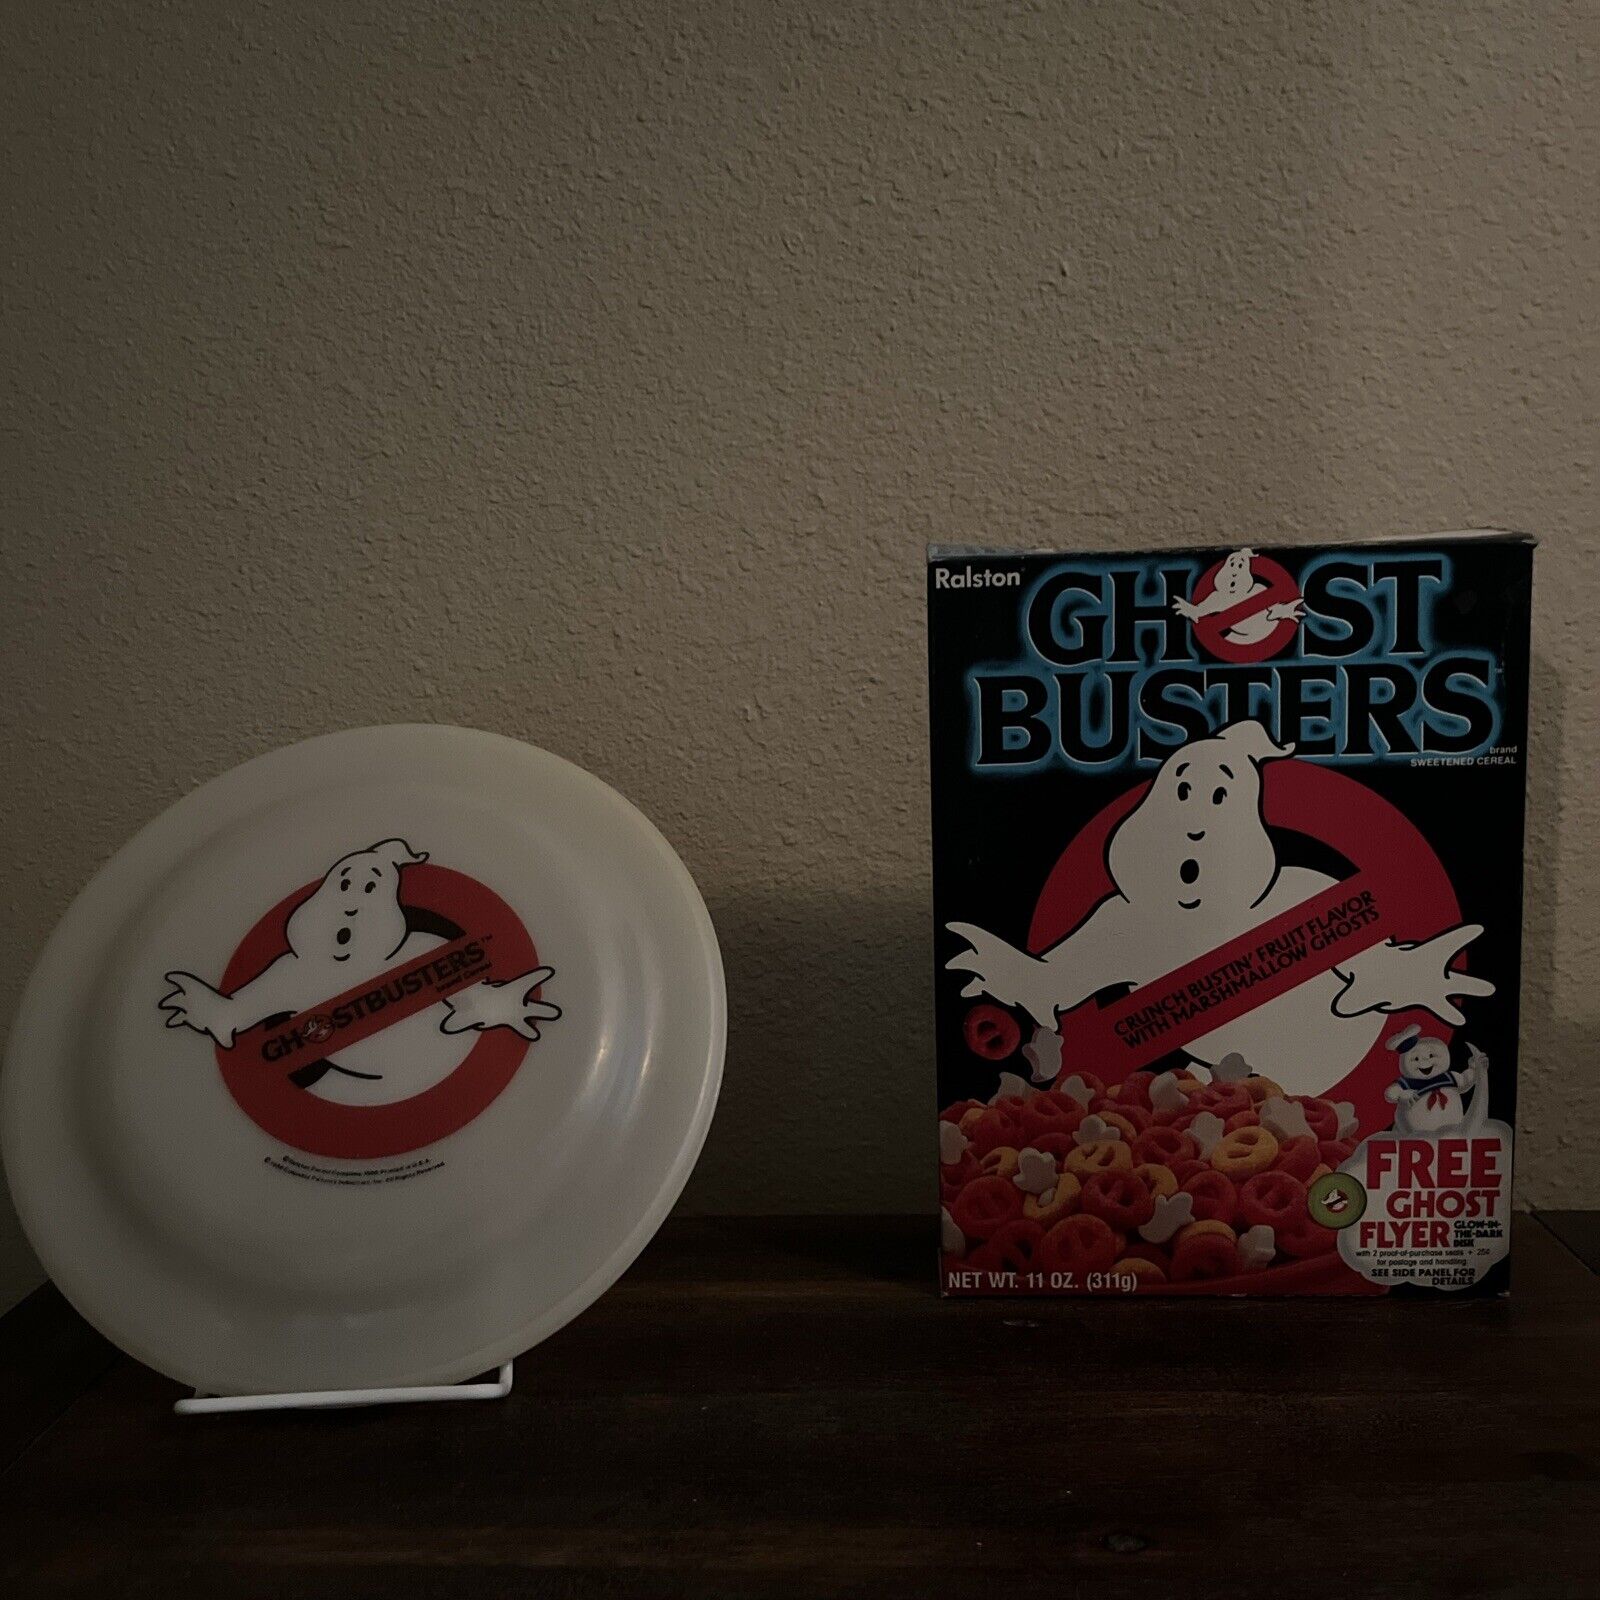 Vintage Ghostbusters Ralston Cereal Box